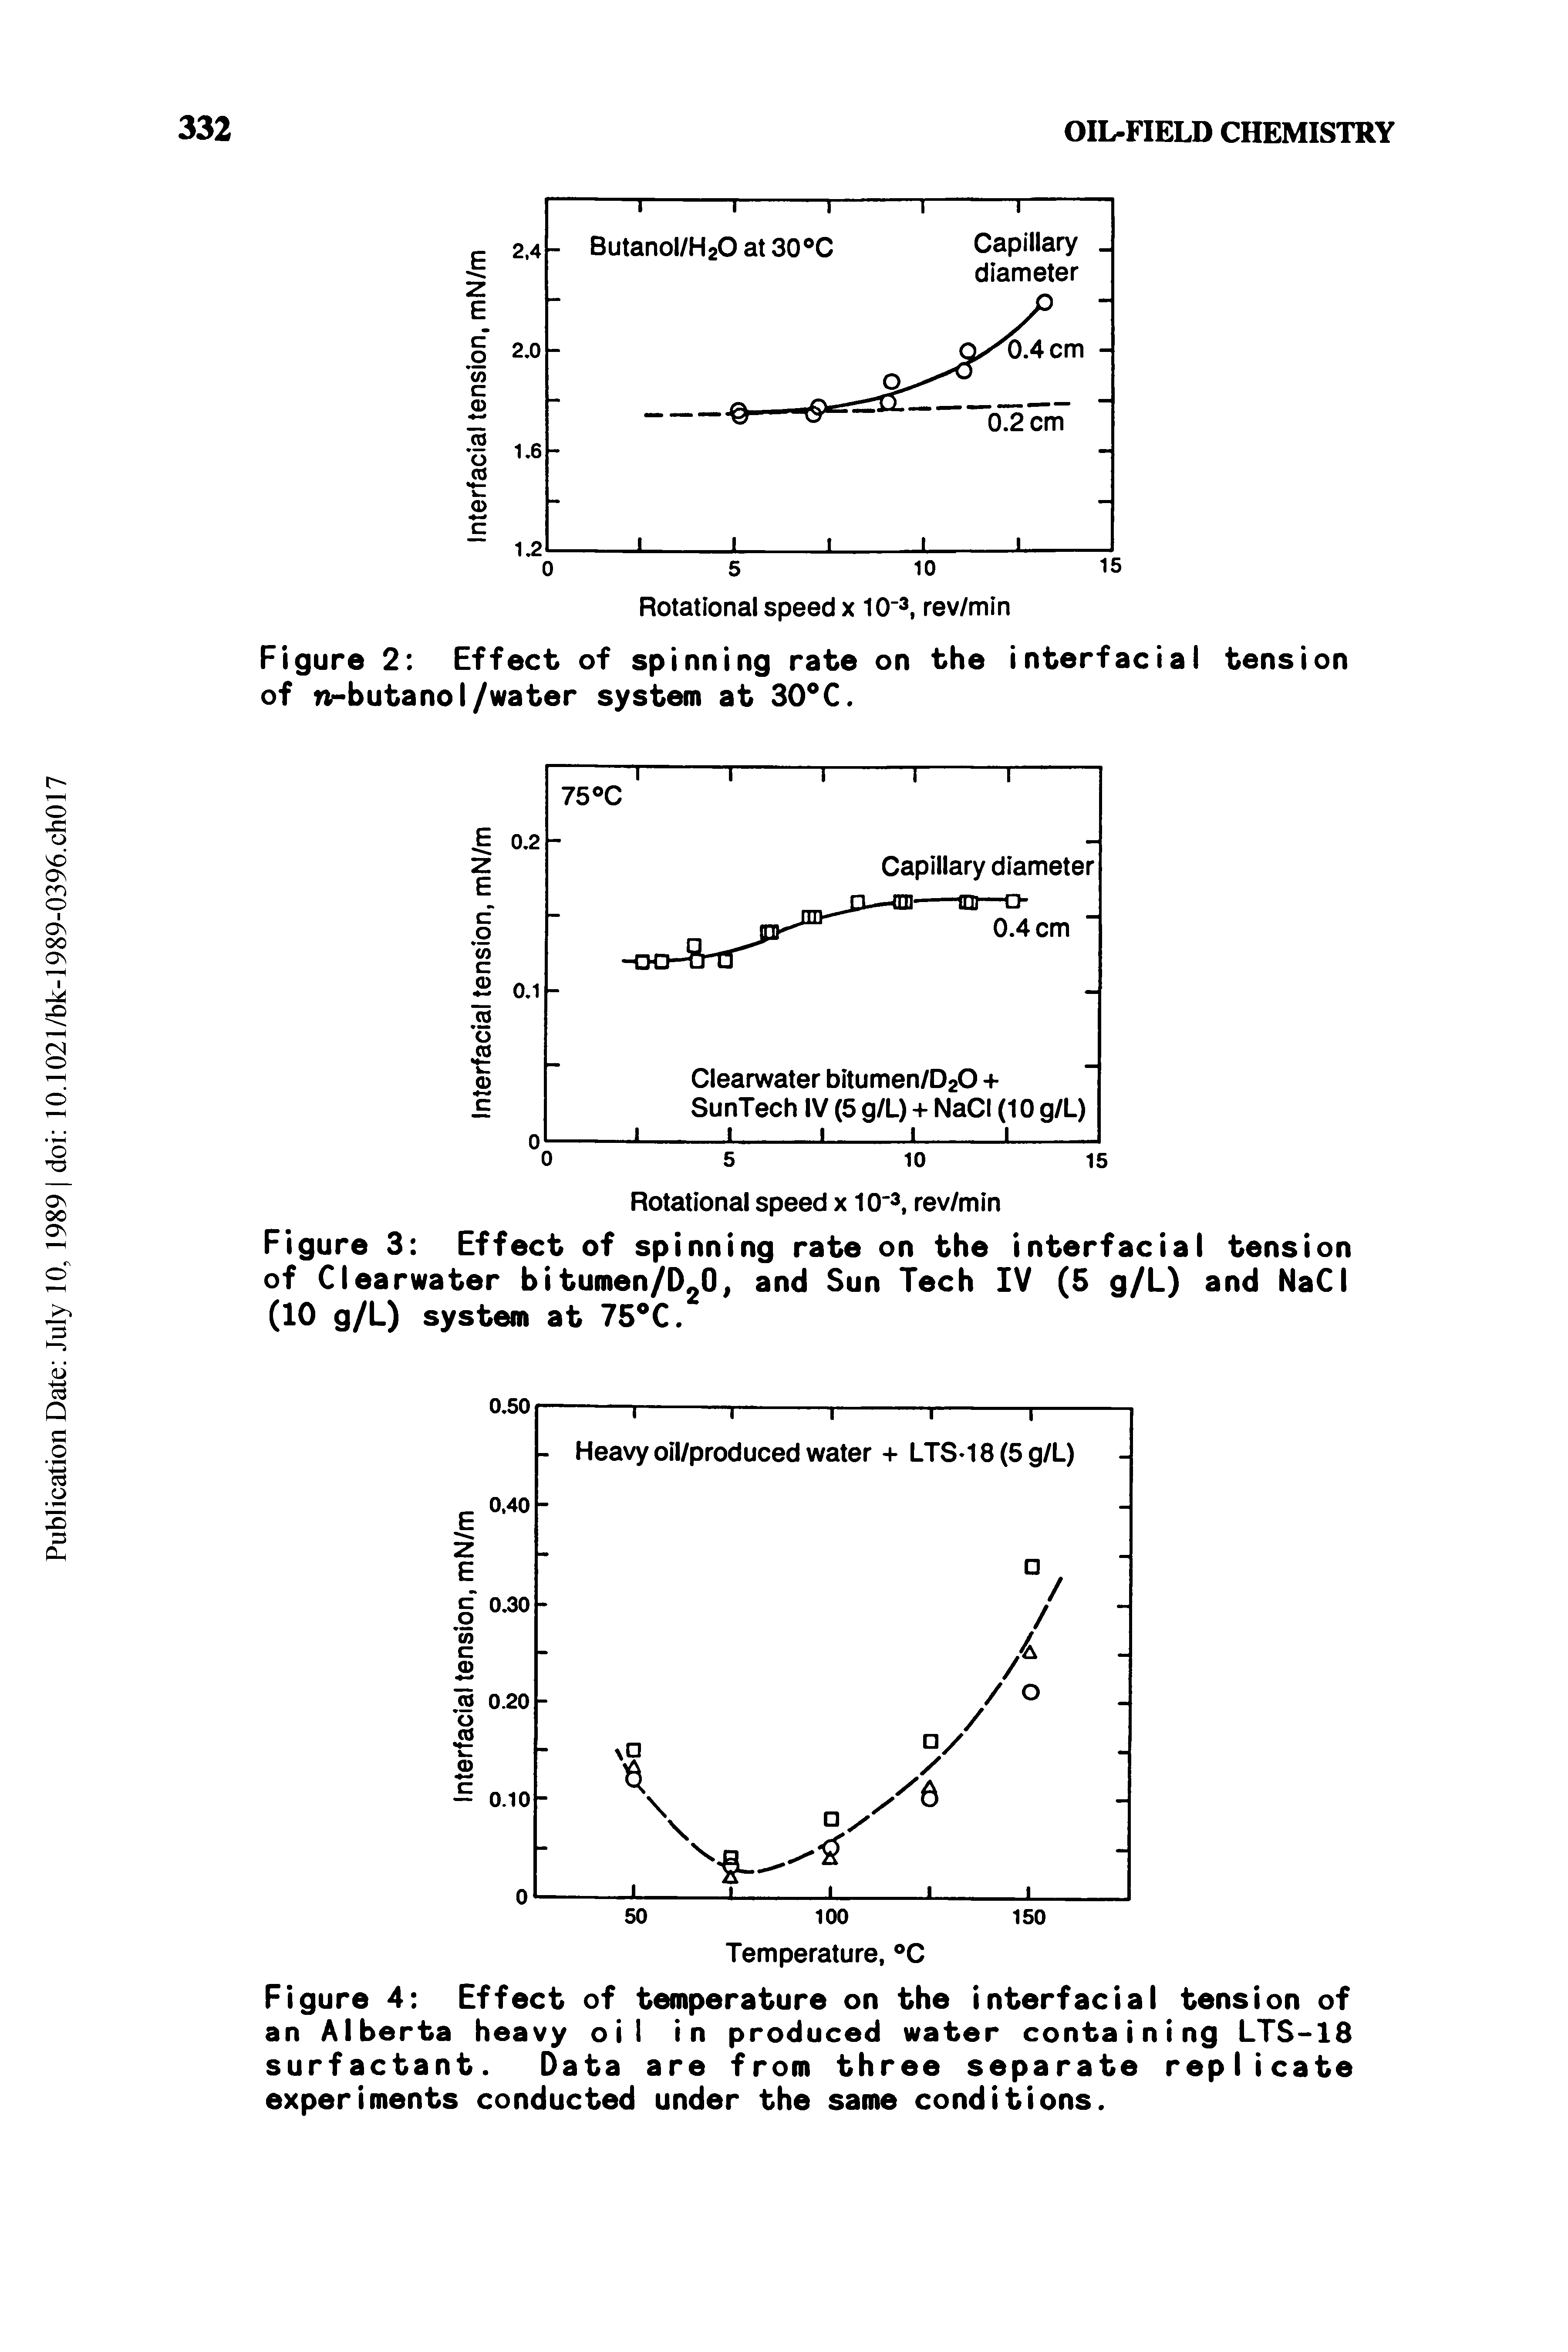 Figure 3 Effect of spinning rate on the interfacial tension of Clearwater bitumen/D20, and Sun Tech IV (5 g/L) and NaCI (10 g/L) system at 75°C.